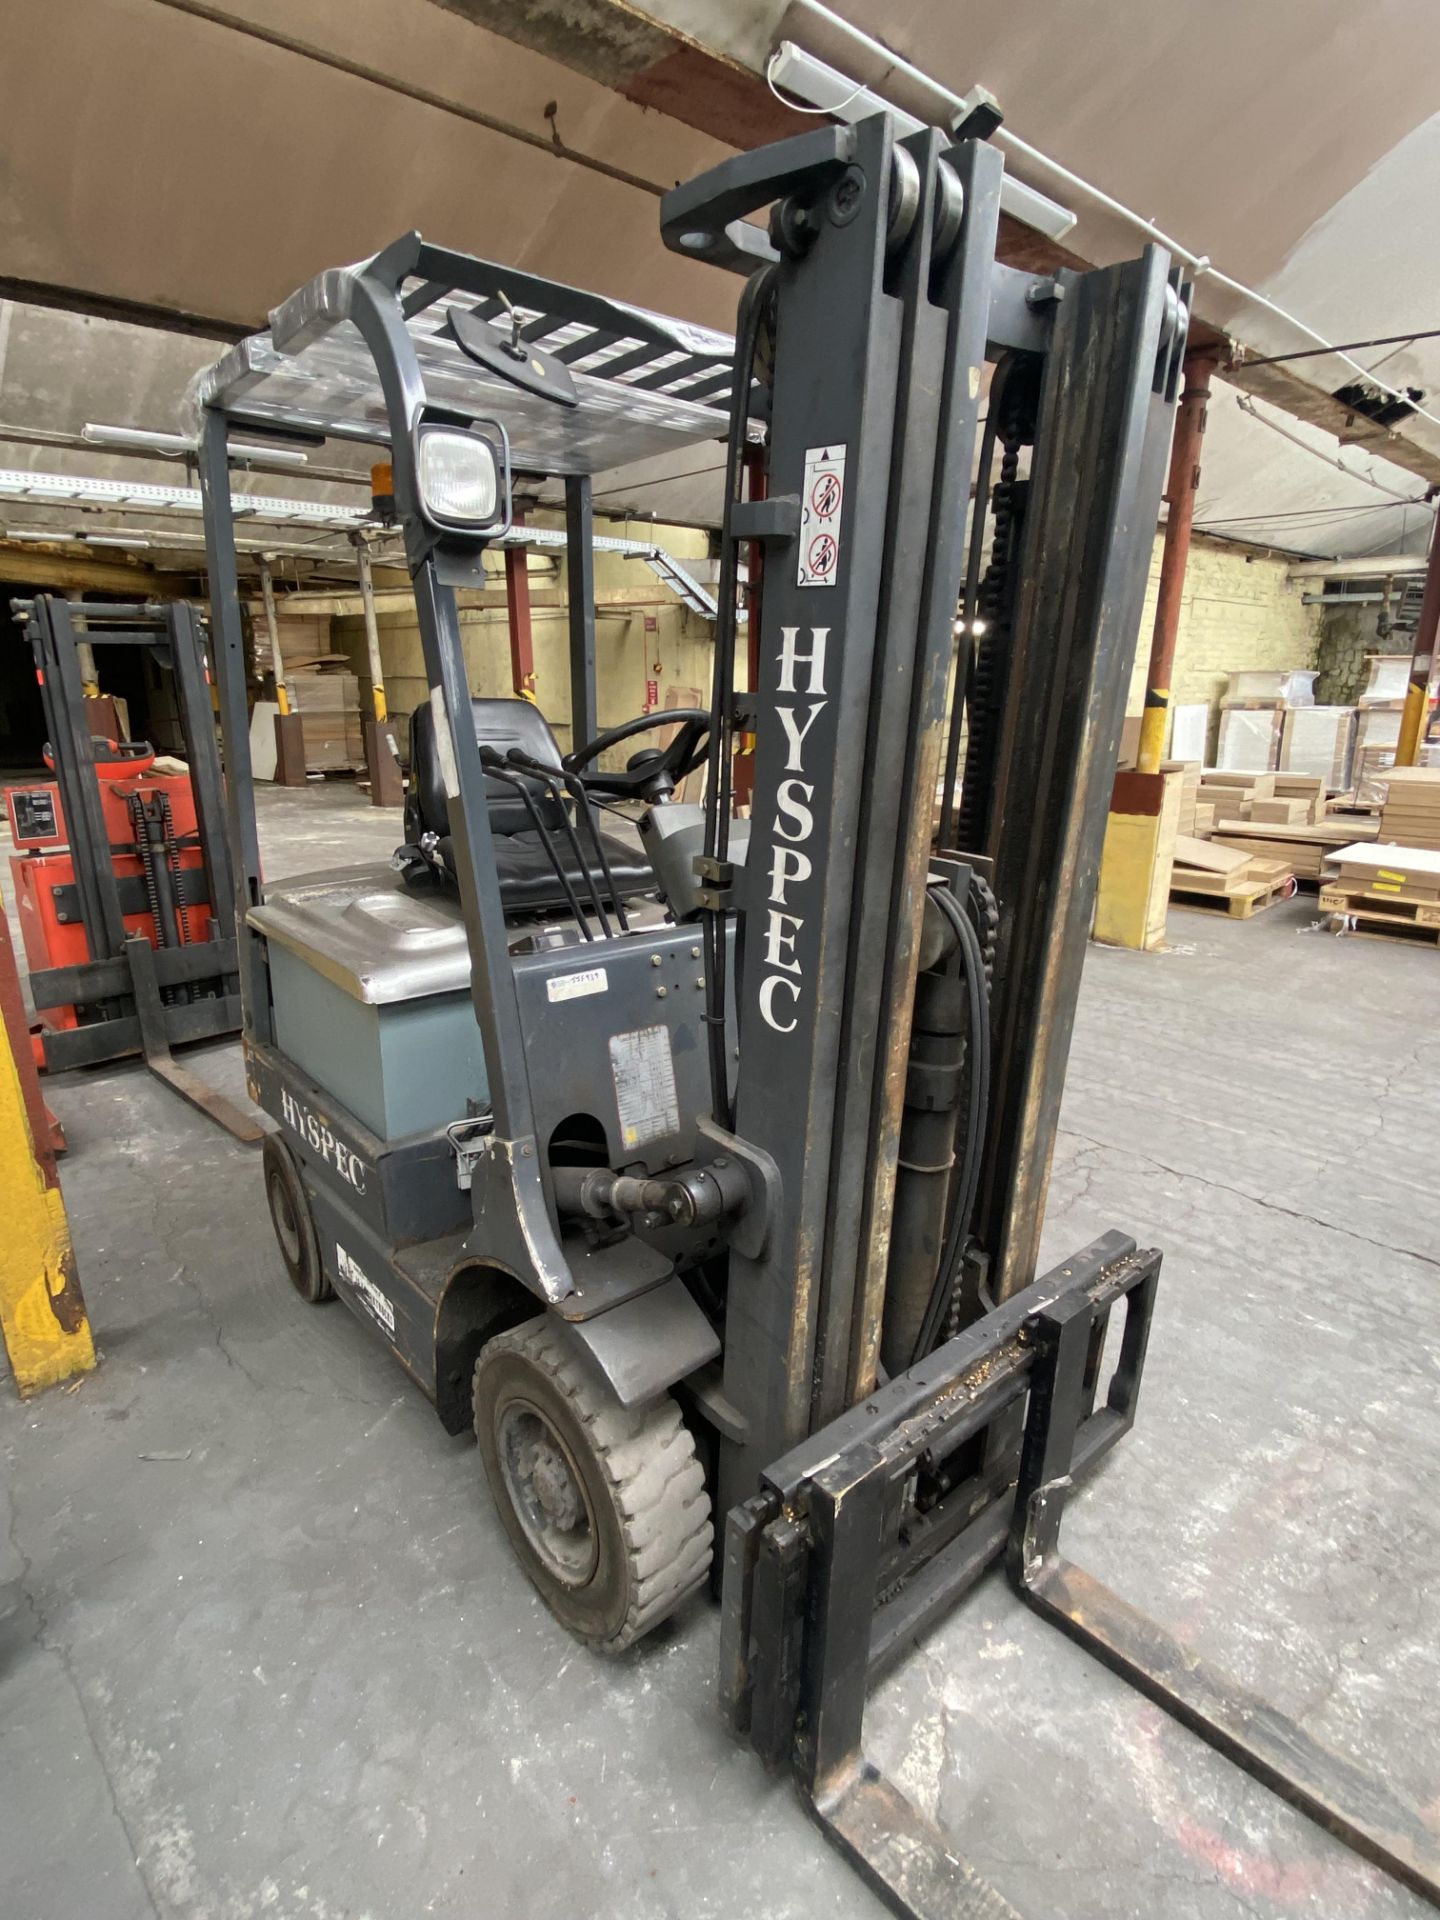 Hypsec HE4-15 1200kg cap. Electric Fork Lift Truck, serial no. 08081925, hours unknown, 4500mm - Image 3 of 8